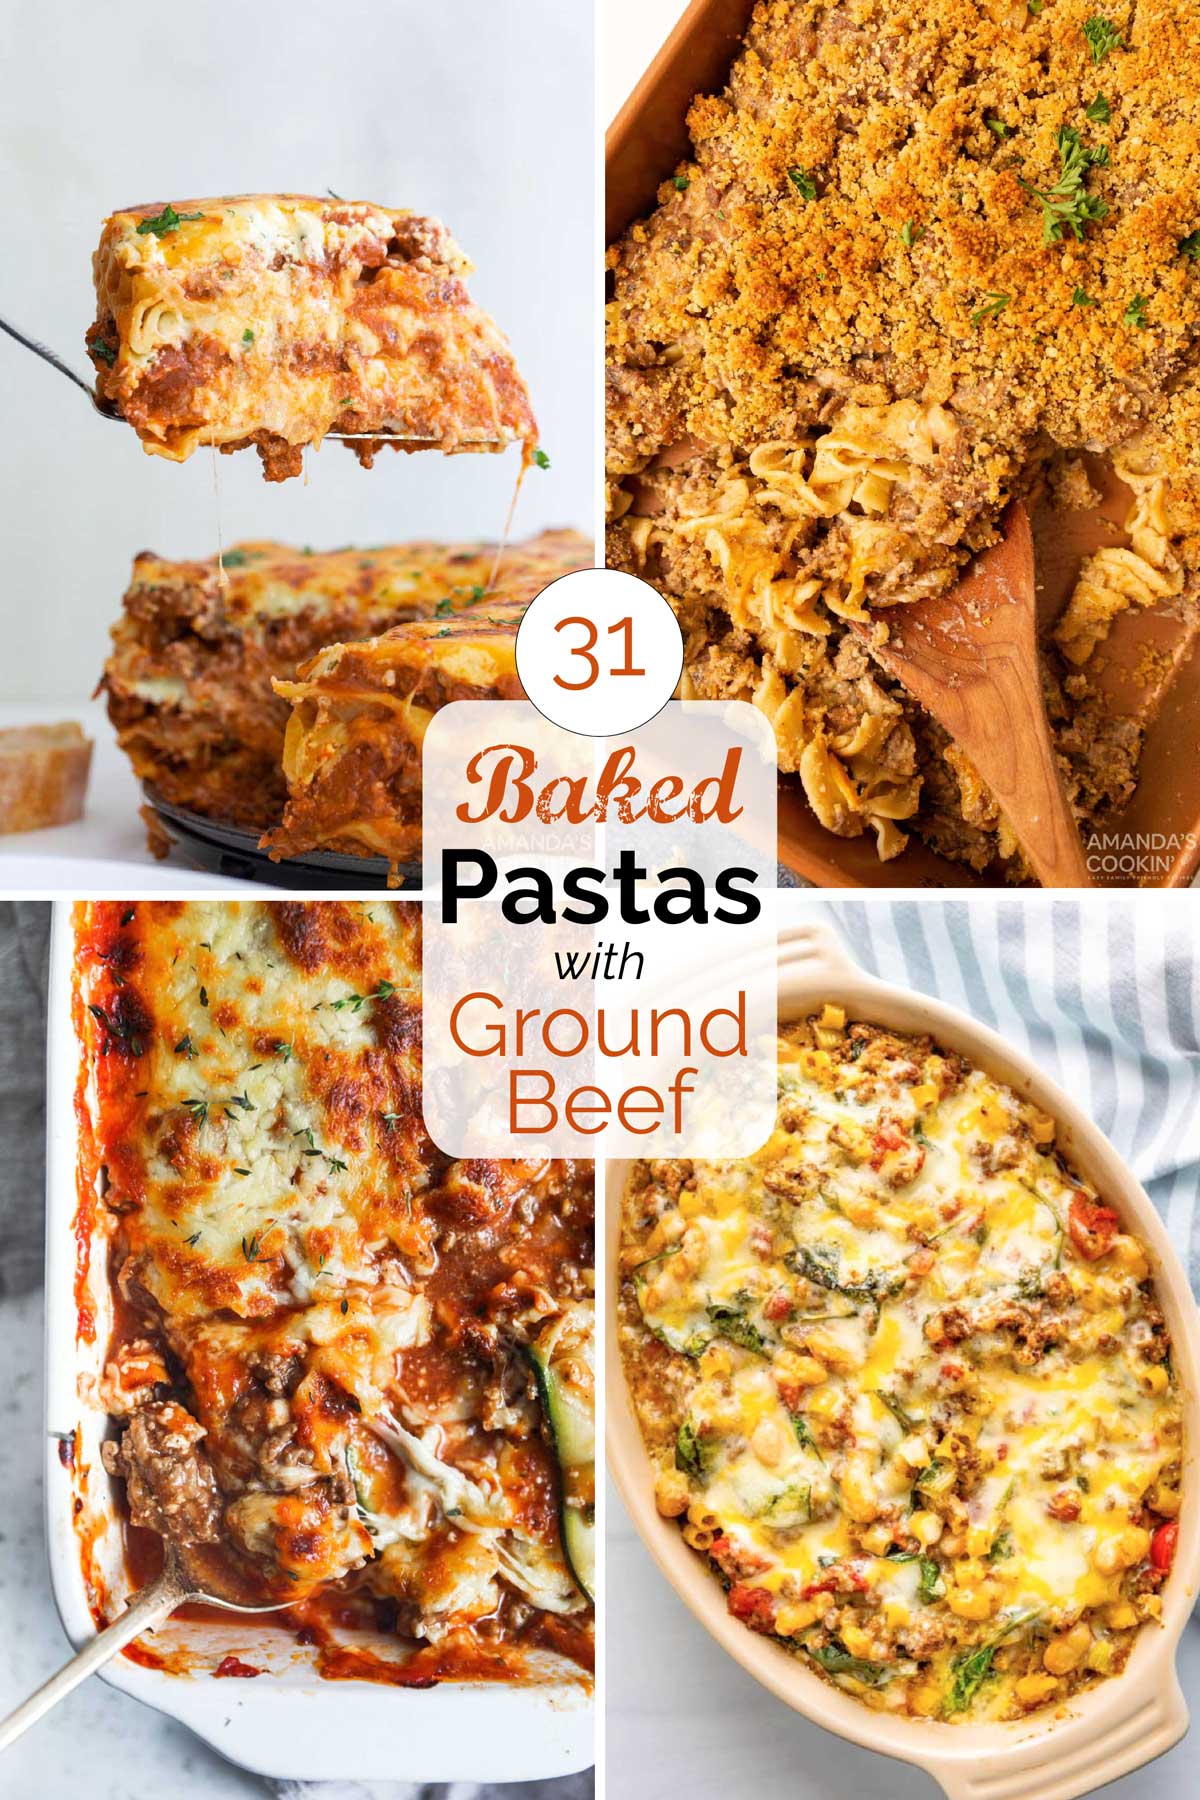 Pinnable collage with photos of 4 of the recipes, with centered overlay text "31 Baked Pastas with Ground Beef".